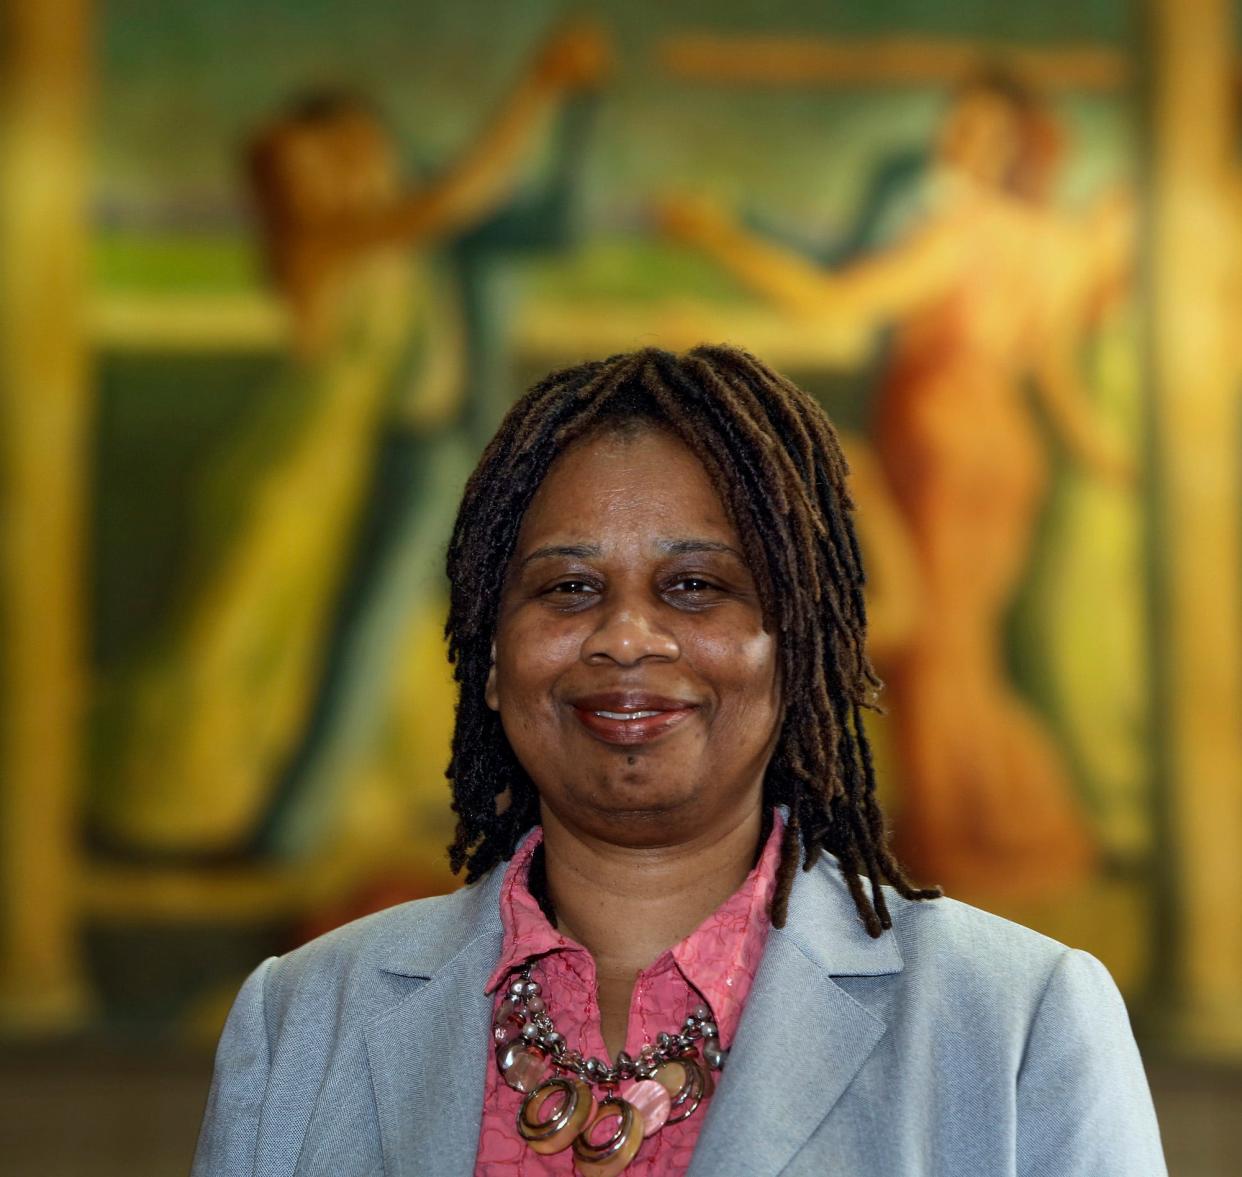 Former Columbus City Schools Internal Auditor Carolyn Smith on March 5, 2014. Smith, who helped expose the district's data-rigging scandal in the 2010s, resigned in 2022 after the Board of Education president instructed her to stop conducting a survey.